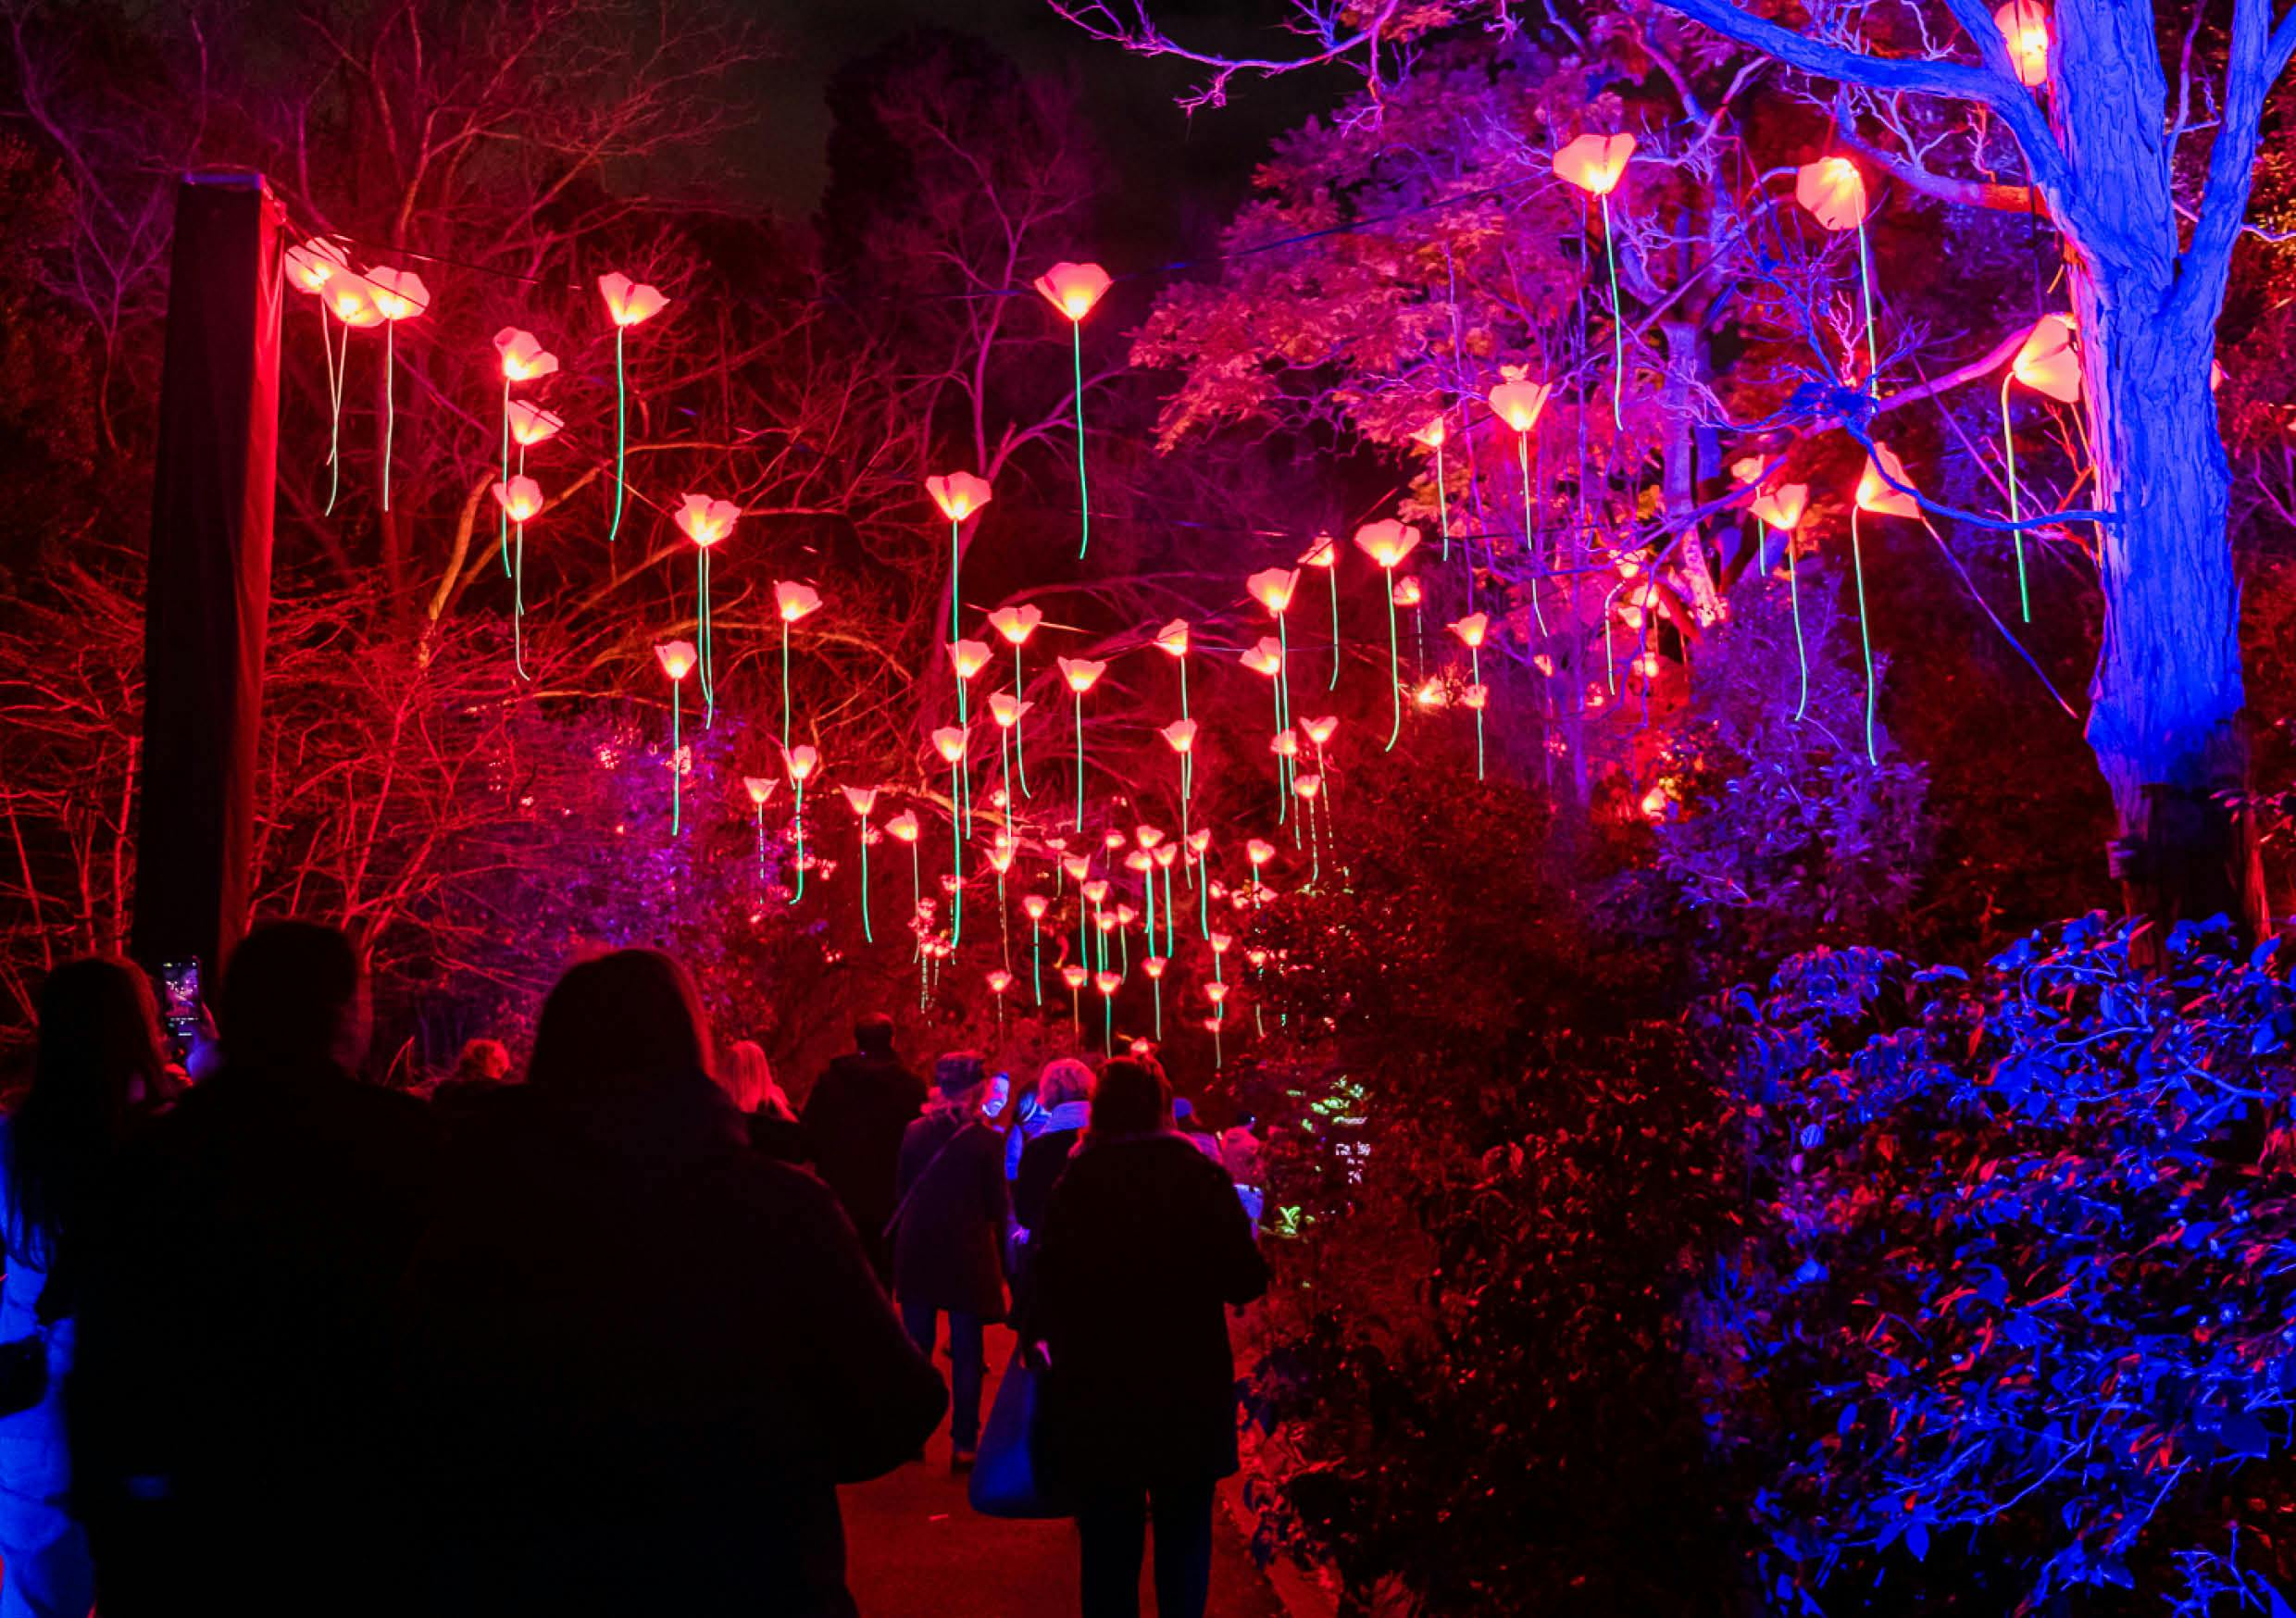 Kings Park to transform into a glowing winter wonderland this June